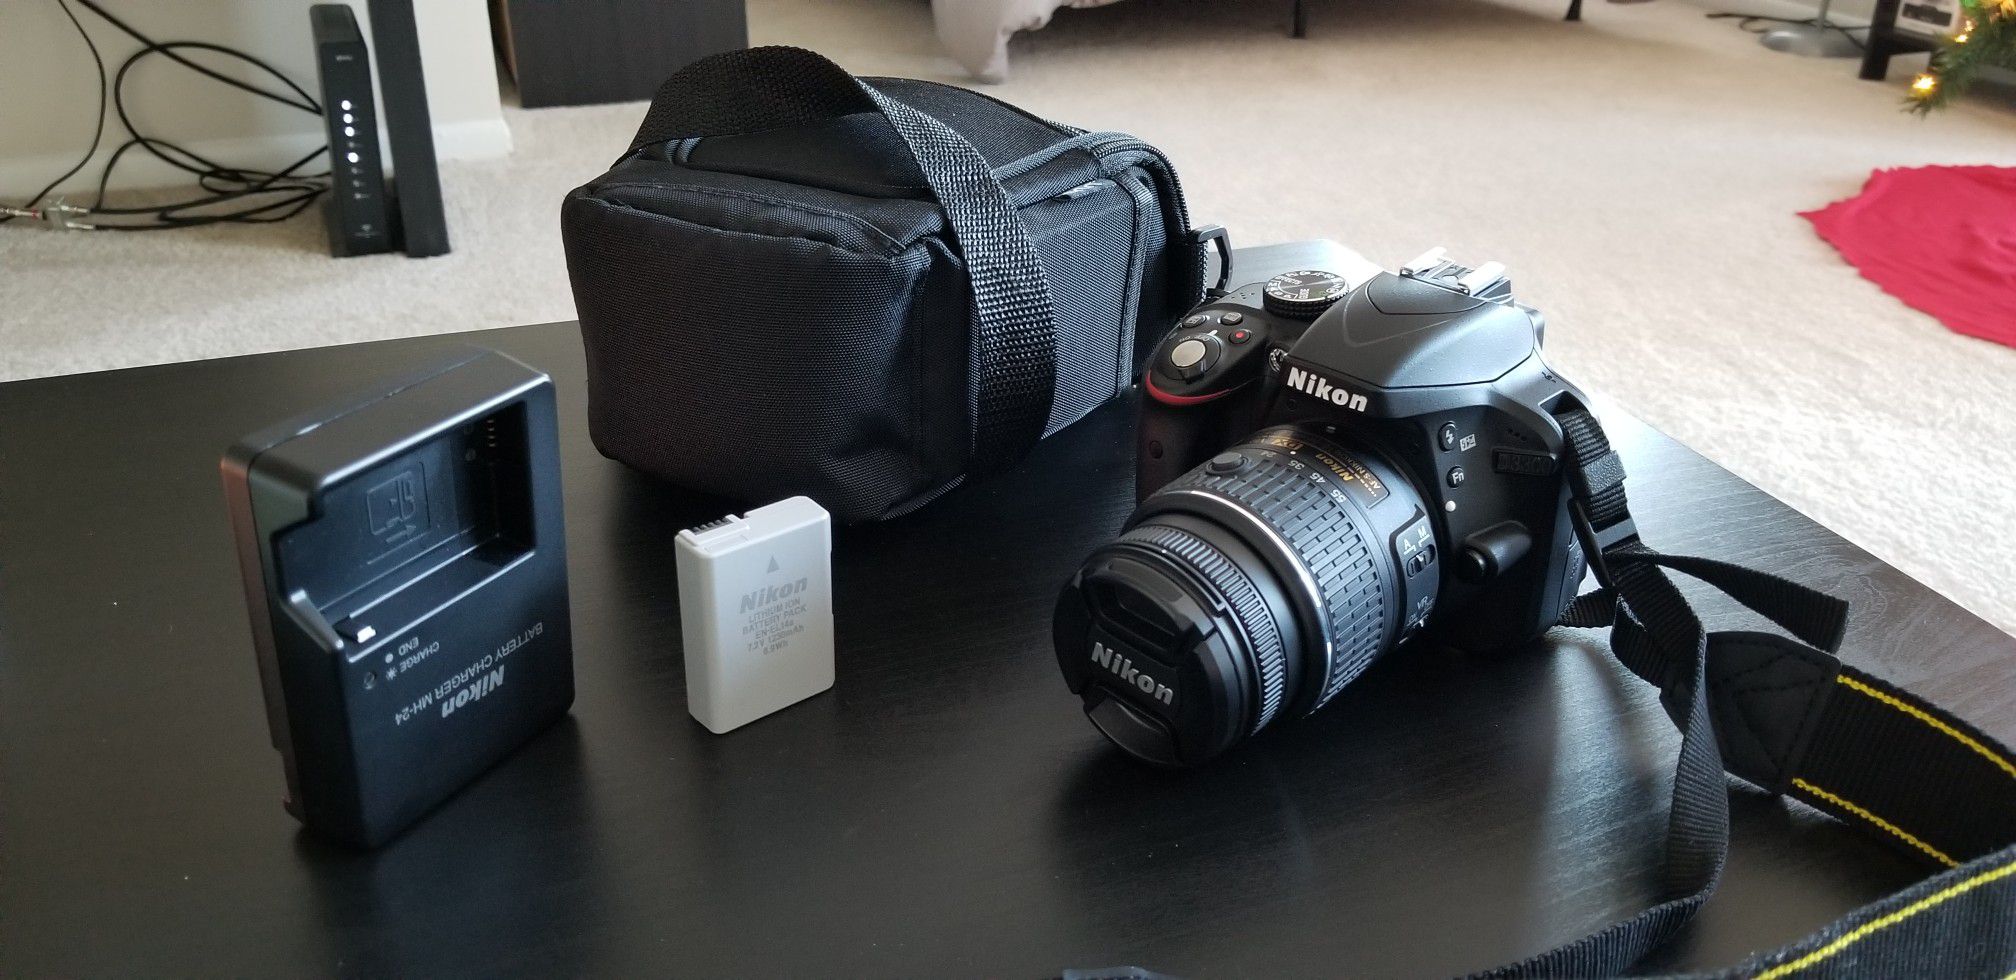 Nikon D3300 with 18-55mm lens, battery and battery charger